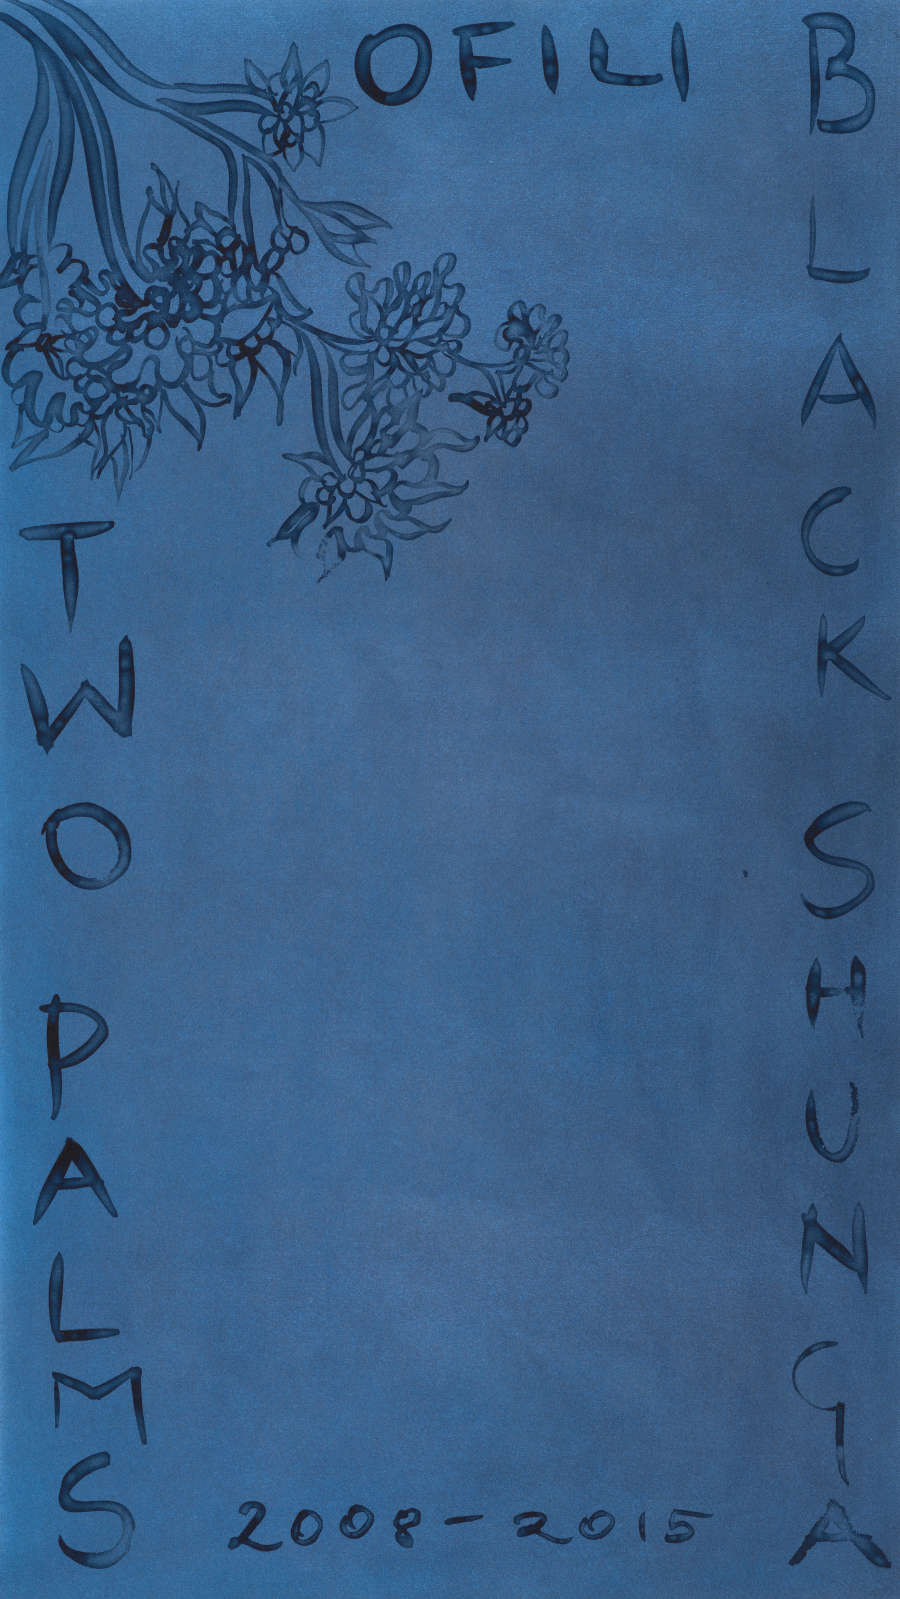 Etching on dyed blue paper with an illustration of blooming flowers emerging from the top left corner. Thick text wraps around the edges, leaving a blue space in the middle. The text reads “Two Palms 2008-2015’ and ‘Ofili Black Shunga’.